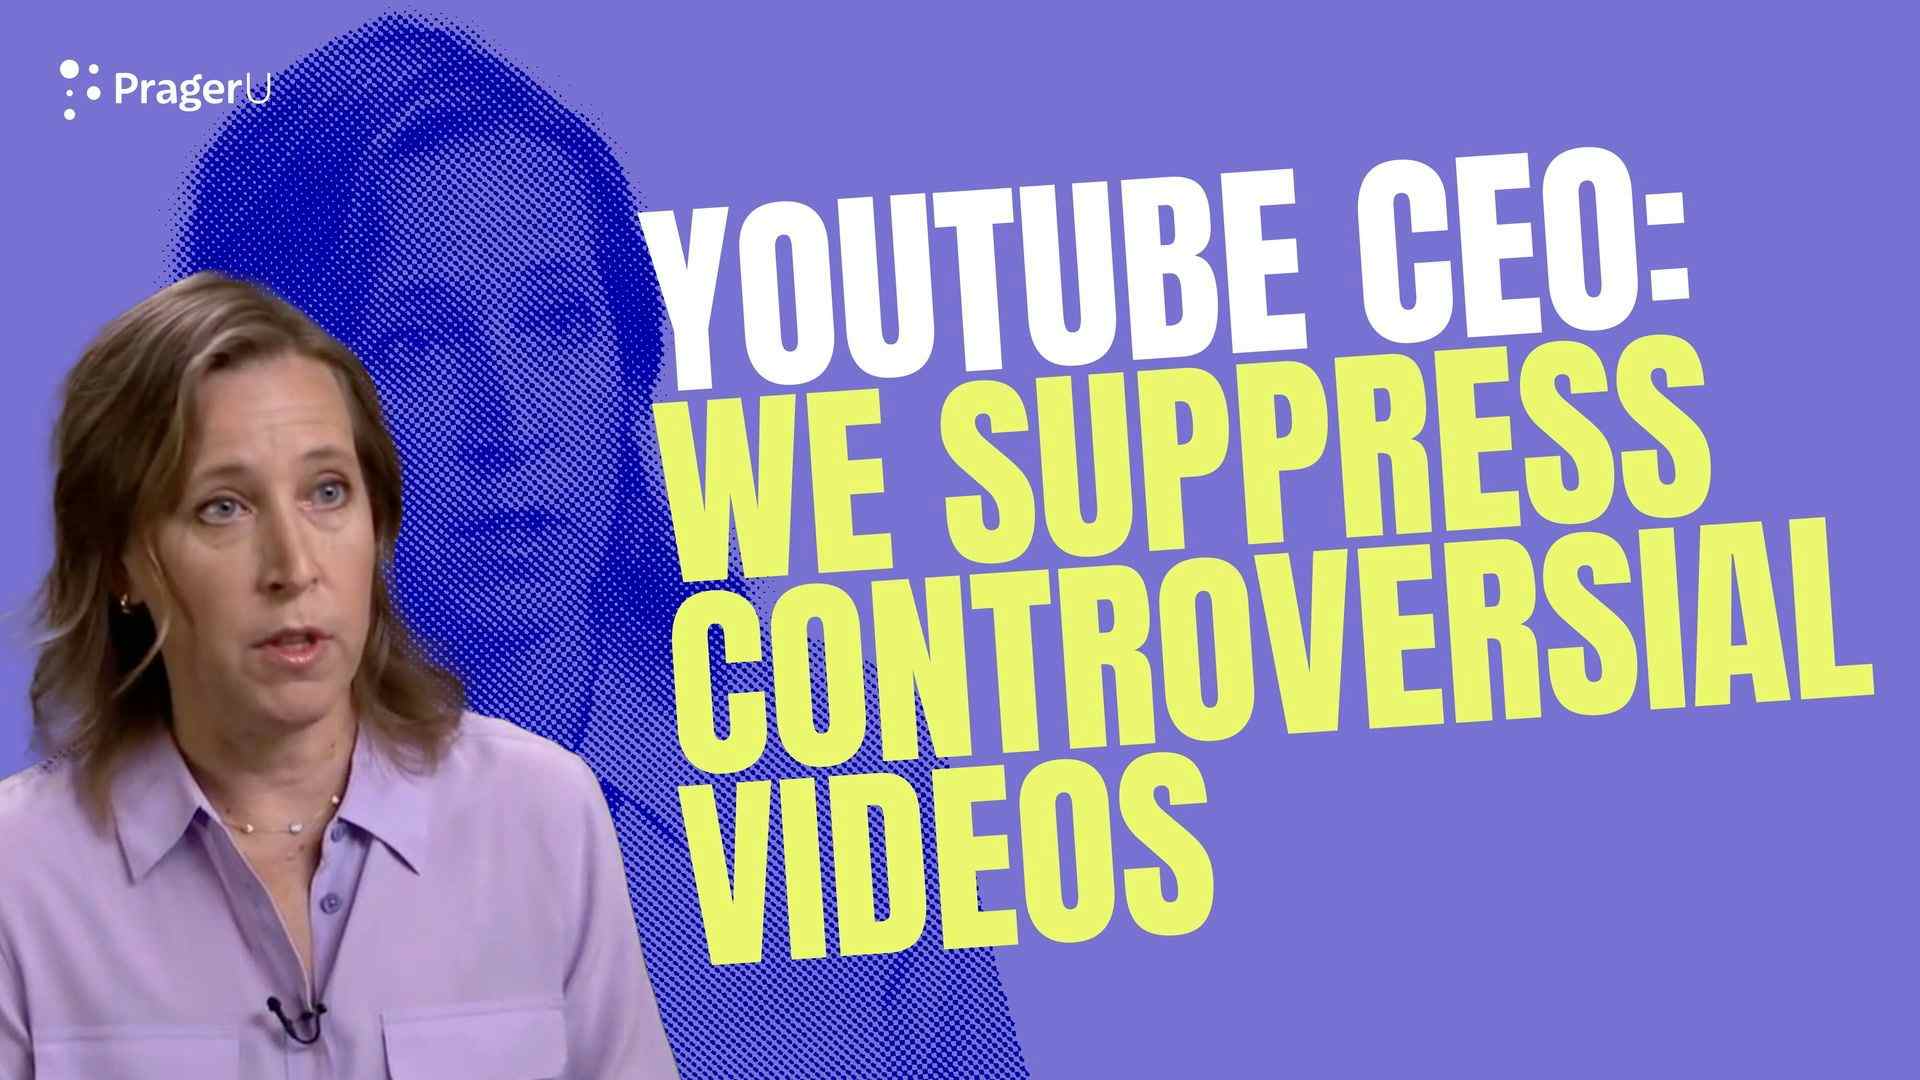 YouTube CEO: We Suppress Controversial Videos